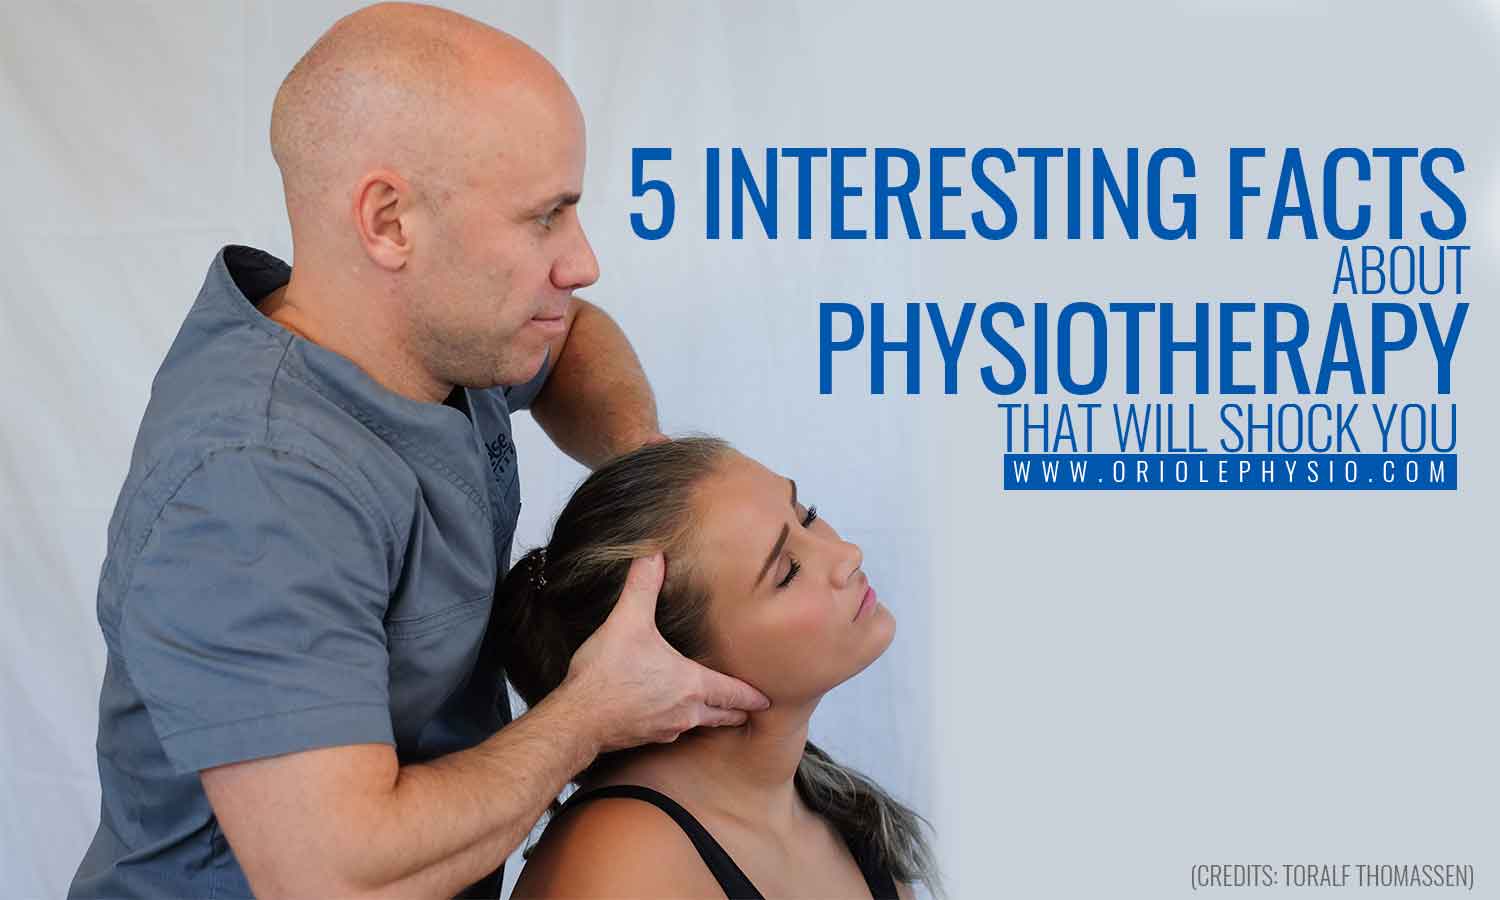 5 Interesting Facts about Physiotherapy That Will Shock You